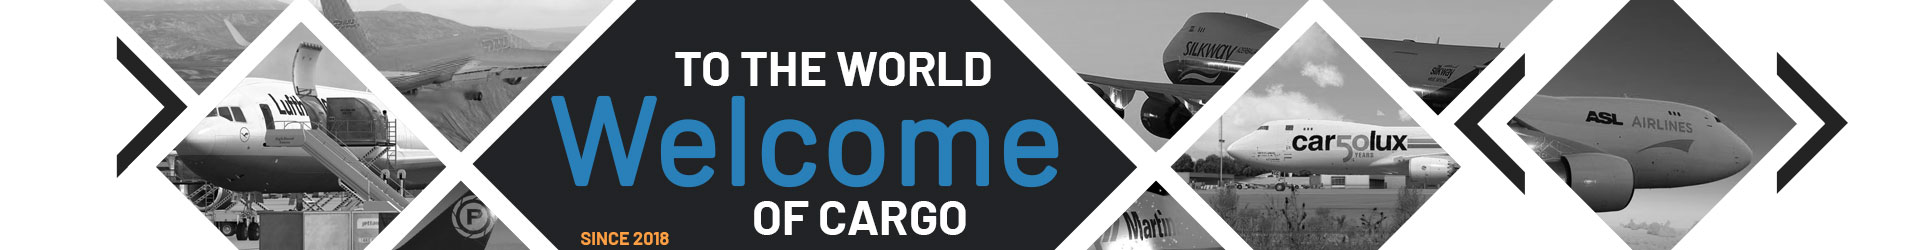 Welcome to the world of cargo